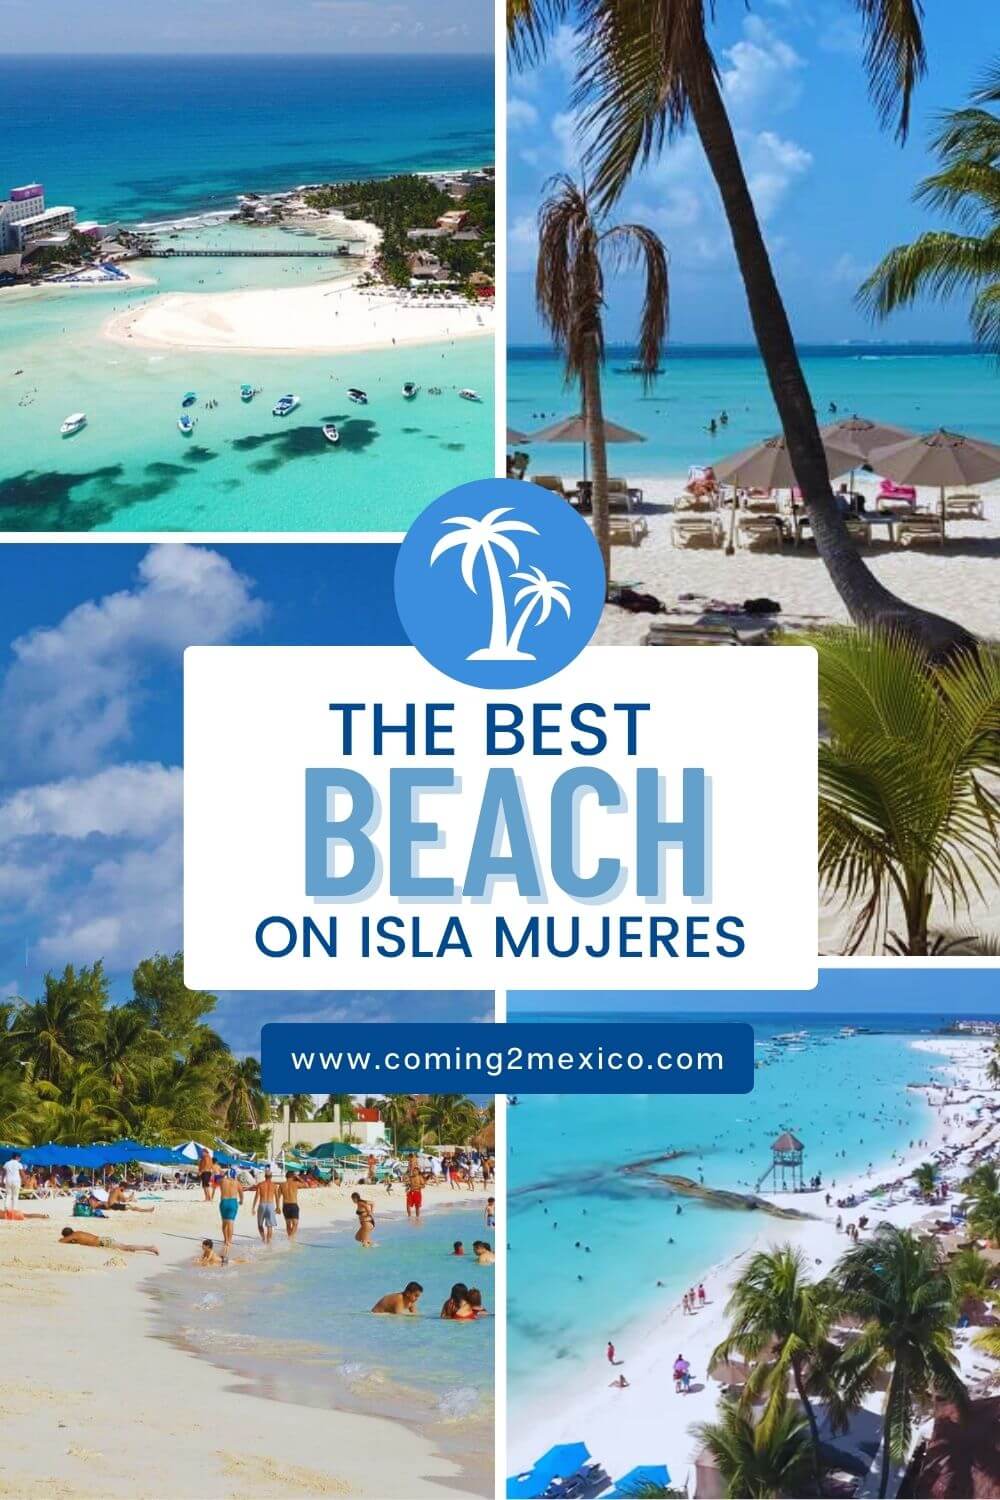 Pinterest pin for the best beach on Isla Mujeres article.